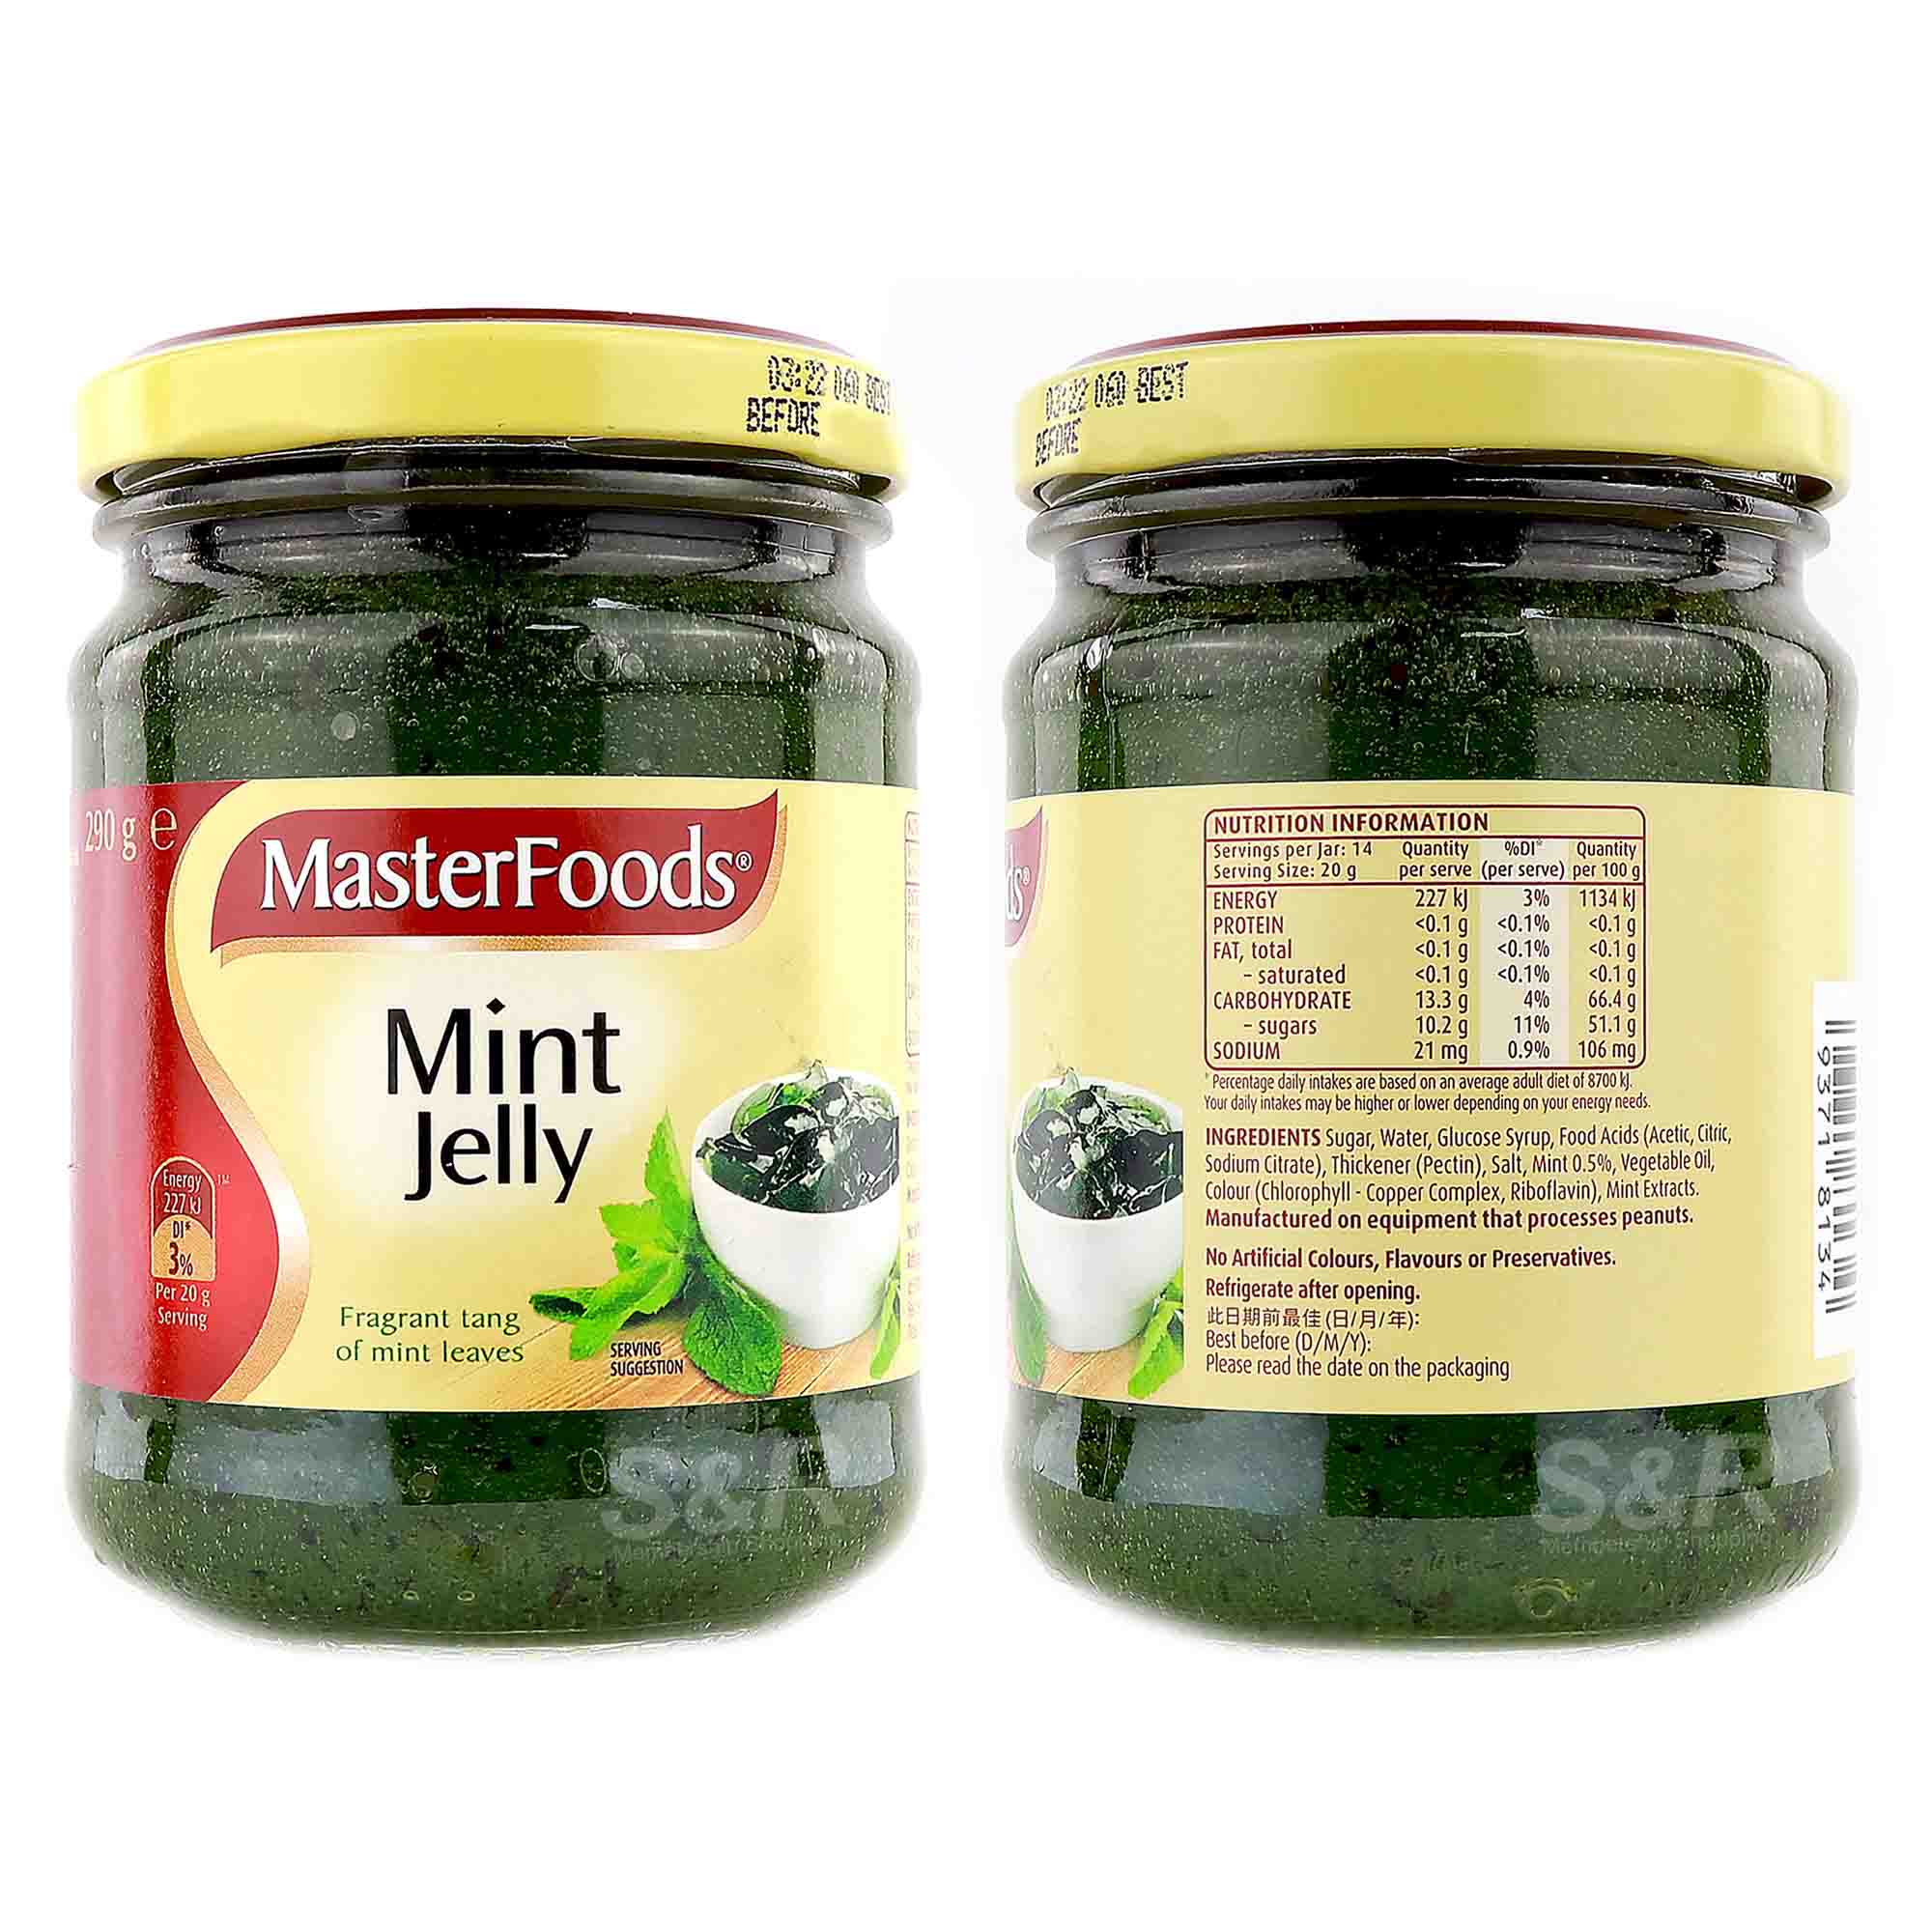 Masterfoods Mint Jelly Sauce 290g